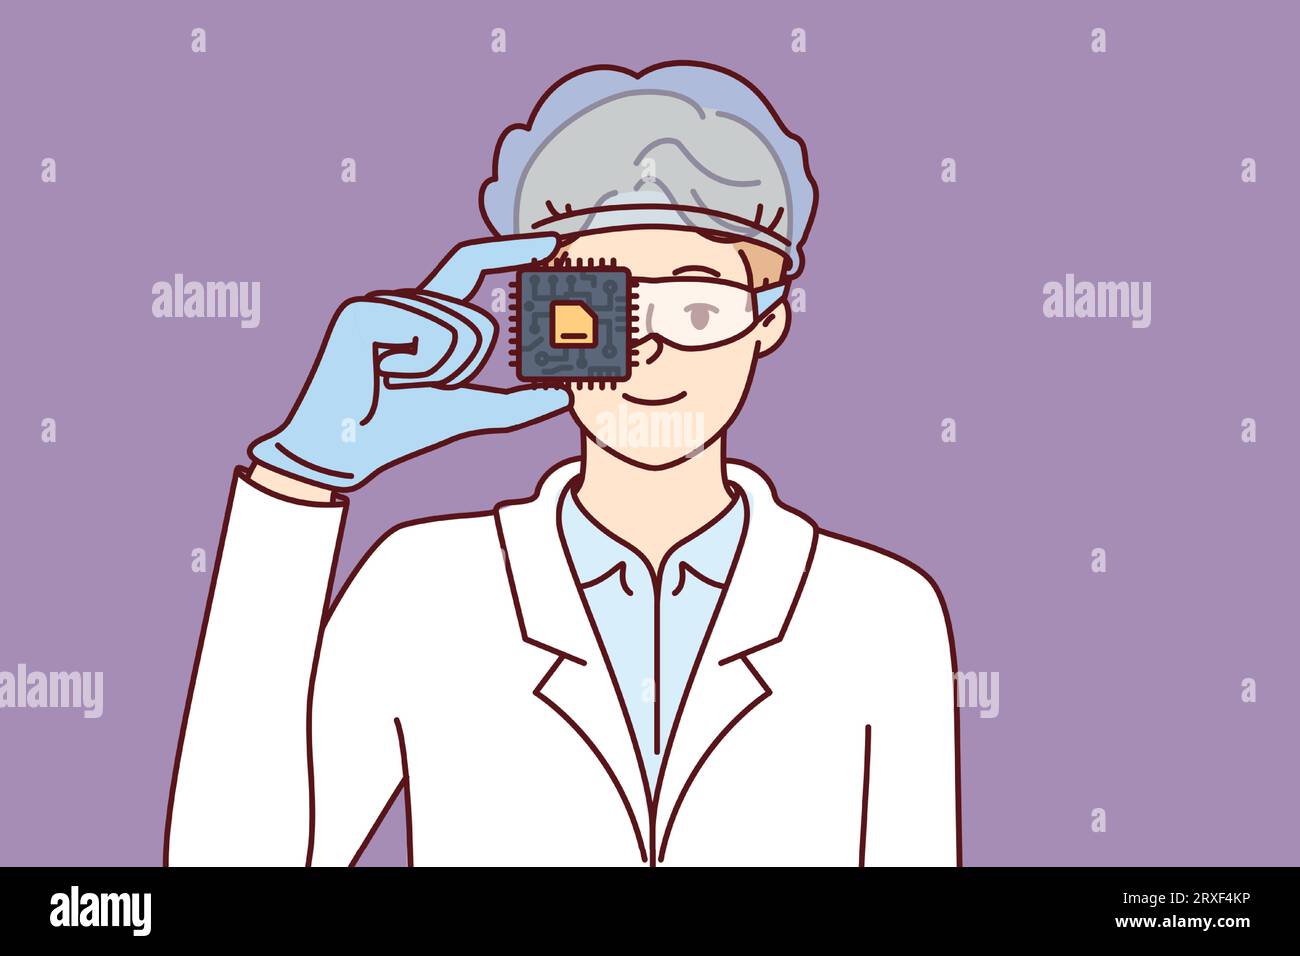 Man computer engineer holding microchip calling for investment in development of semiconductors and processors. Guy in white coat works in laboratory studying semiconductors and printed circuit boards Stock Vector